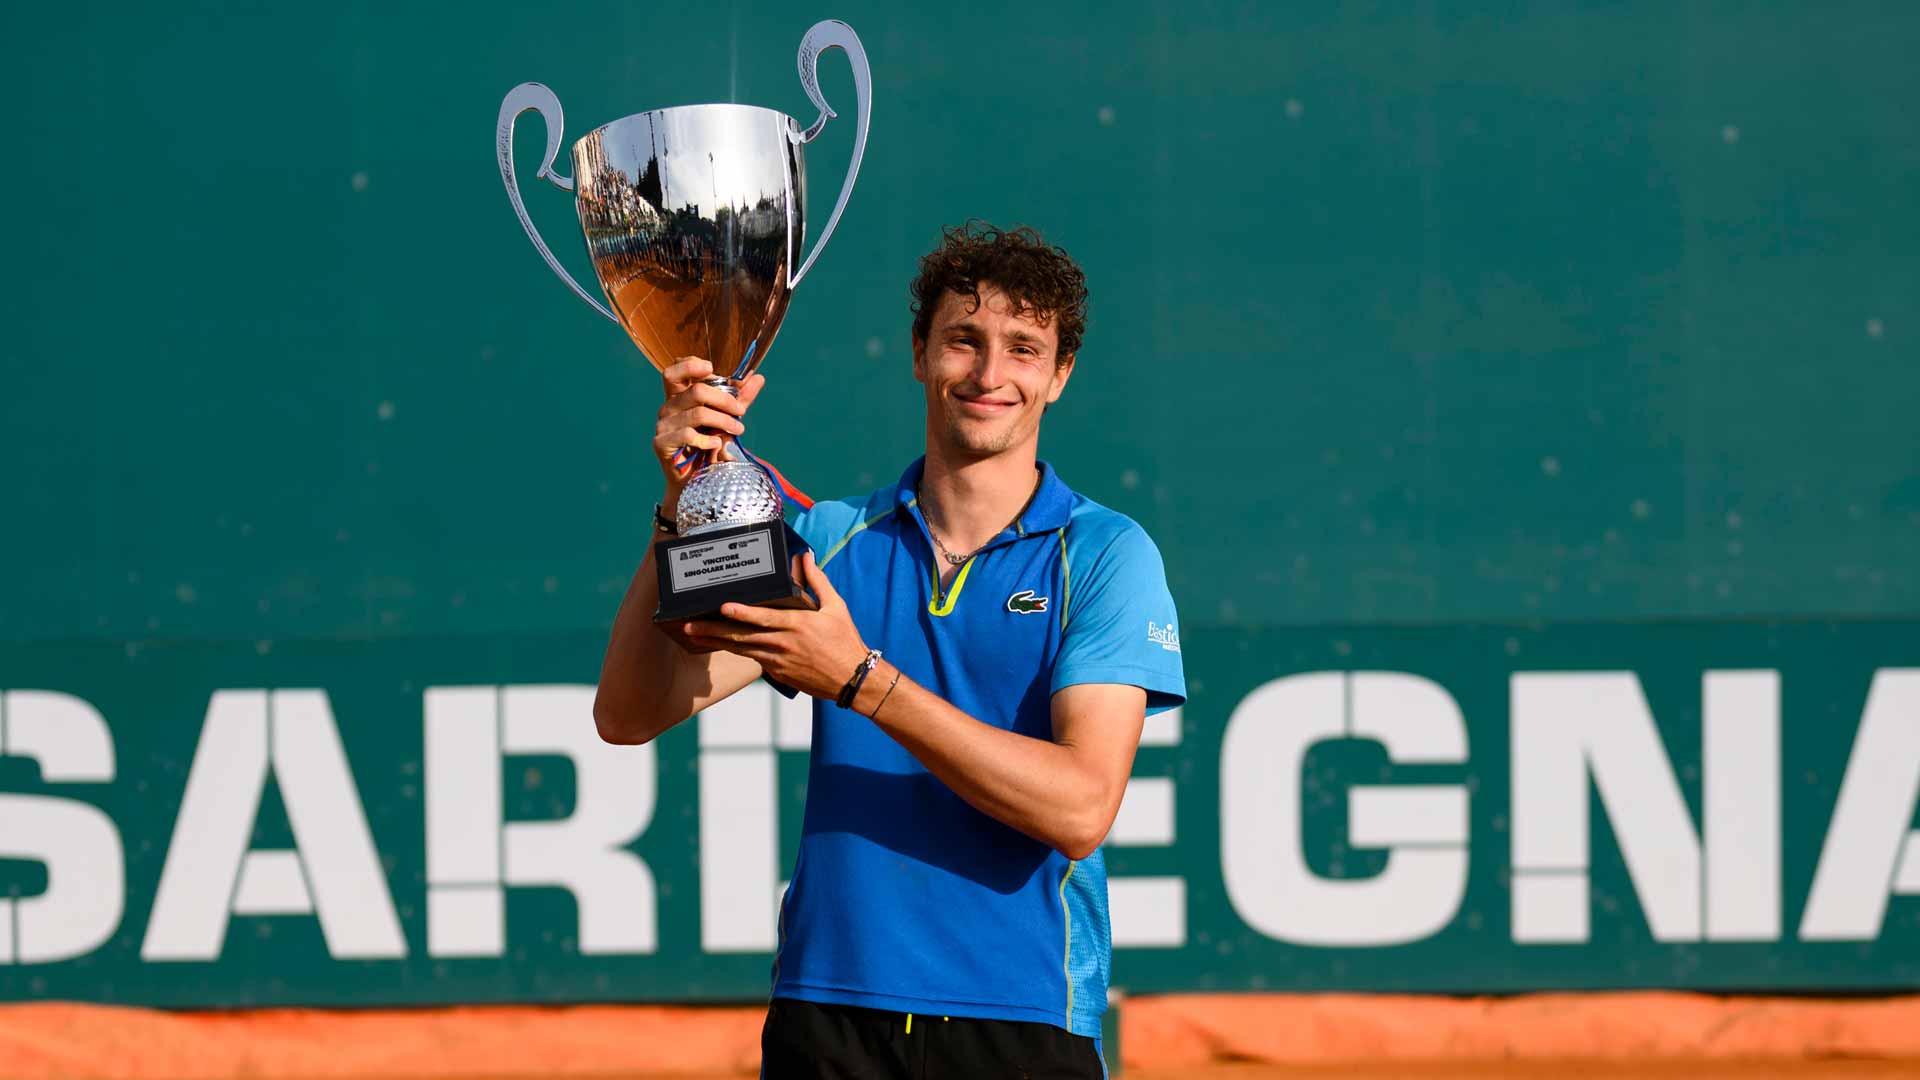 <a href='https://www.atptour.com/en/players/ugo-humbert/hh26/overview'>Ugo Humbert</a> is crowned champion at the Cagliari Challenger.